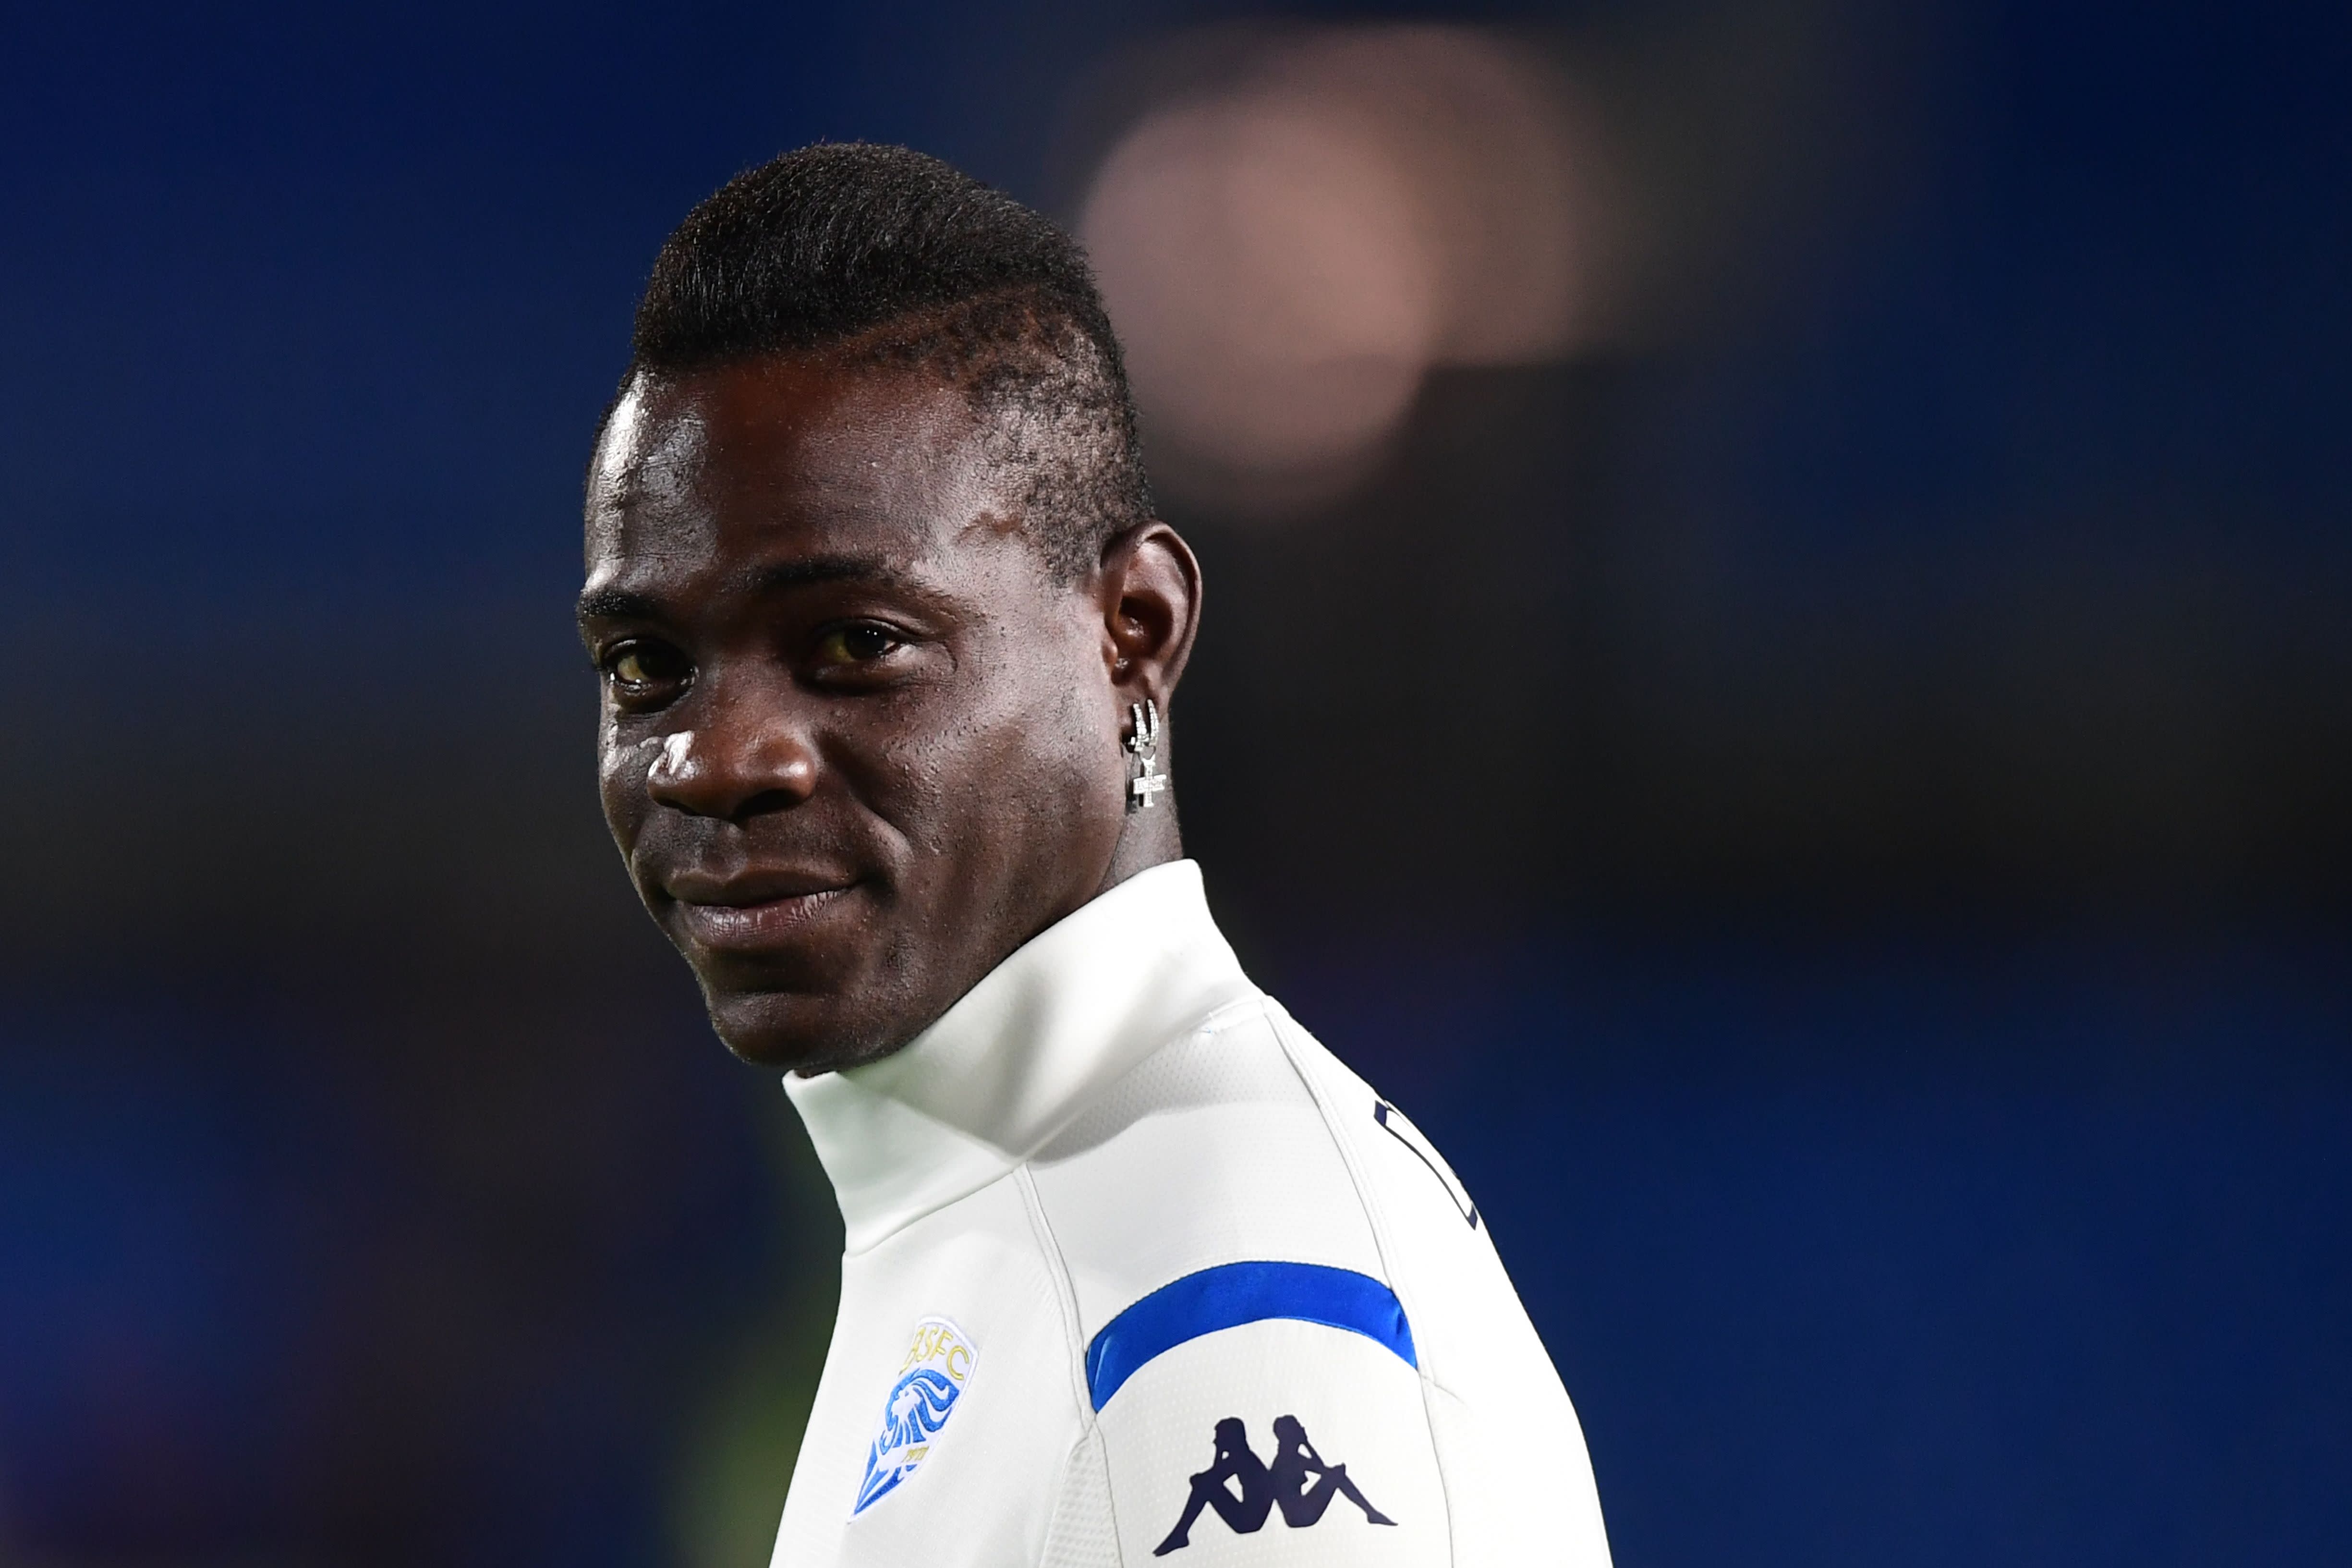 Mario Balotelli should head to MLS, leave behind Europe's racism